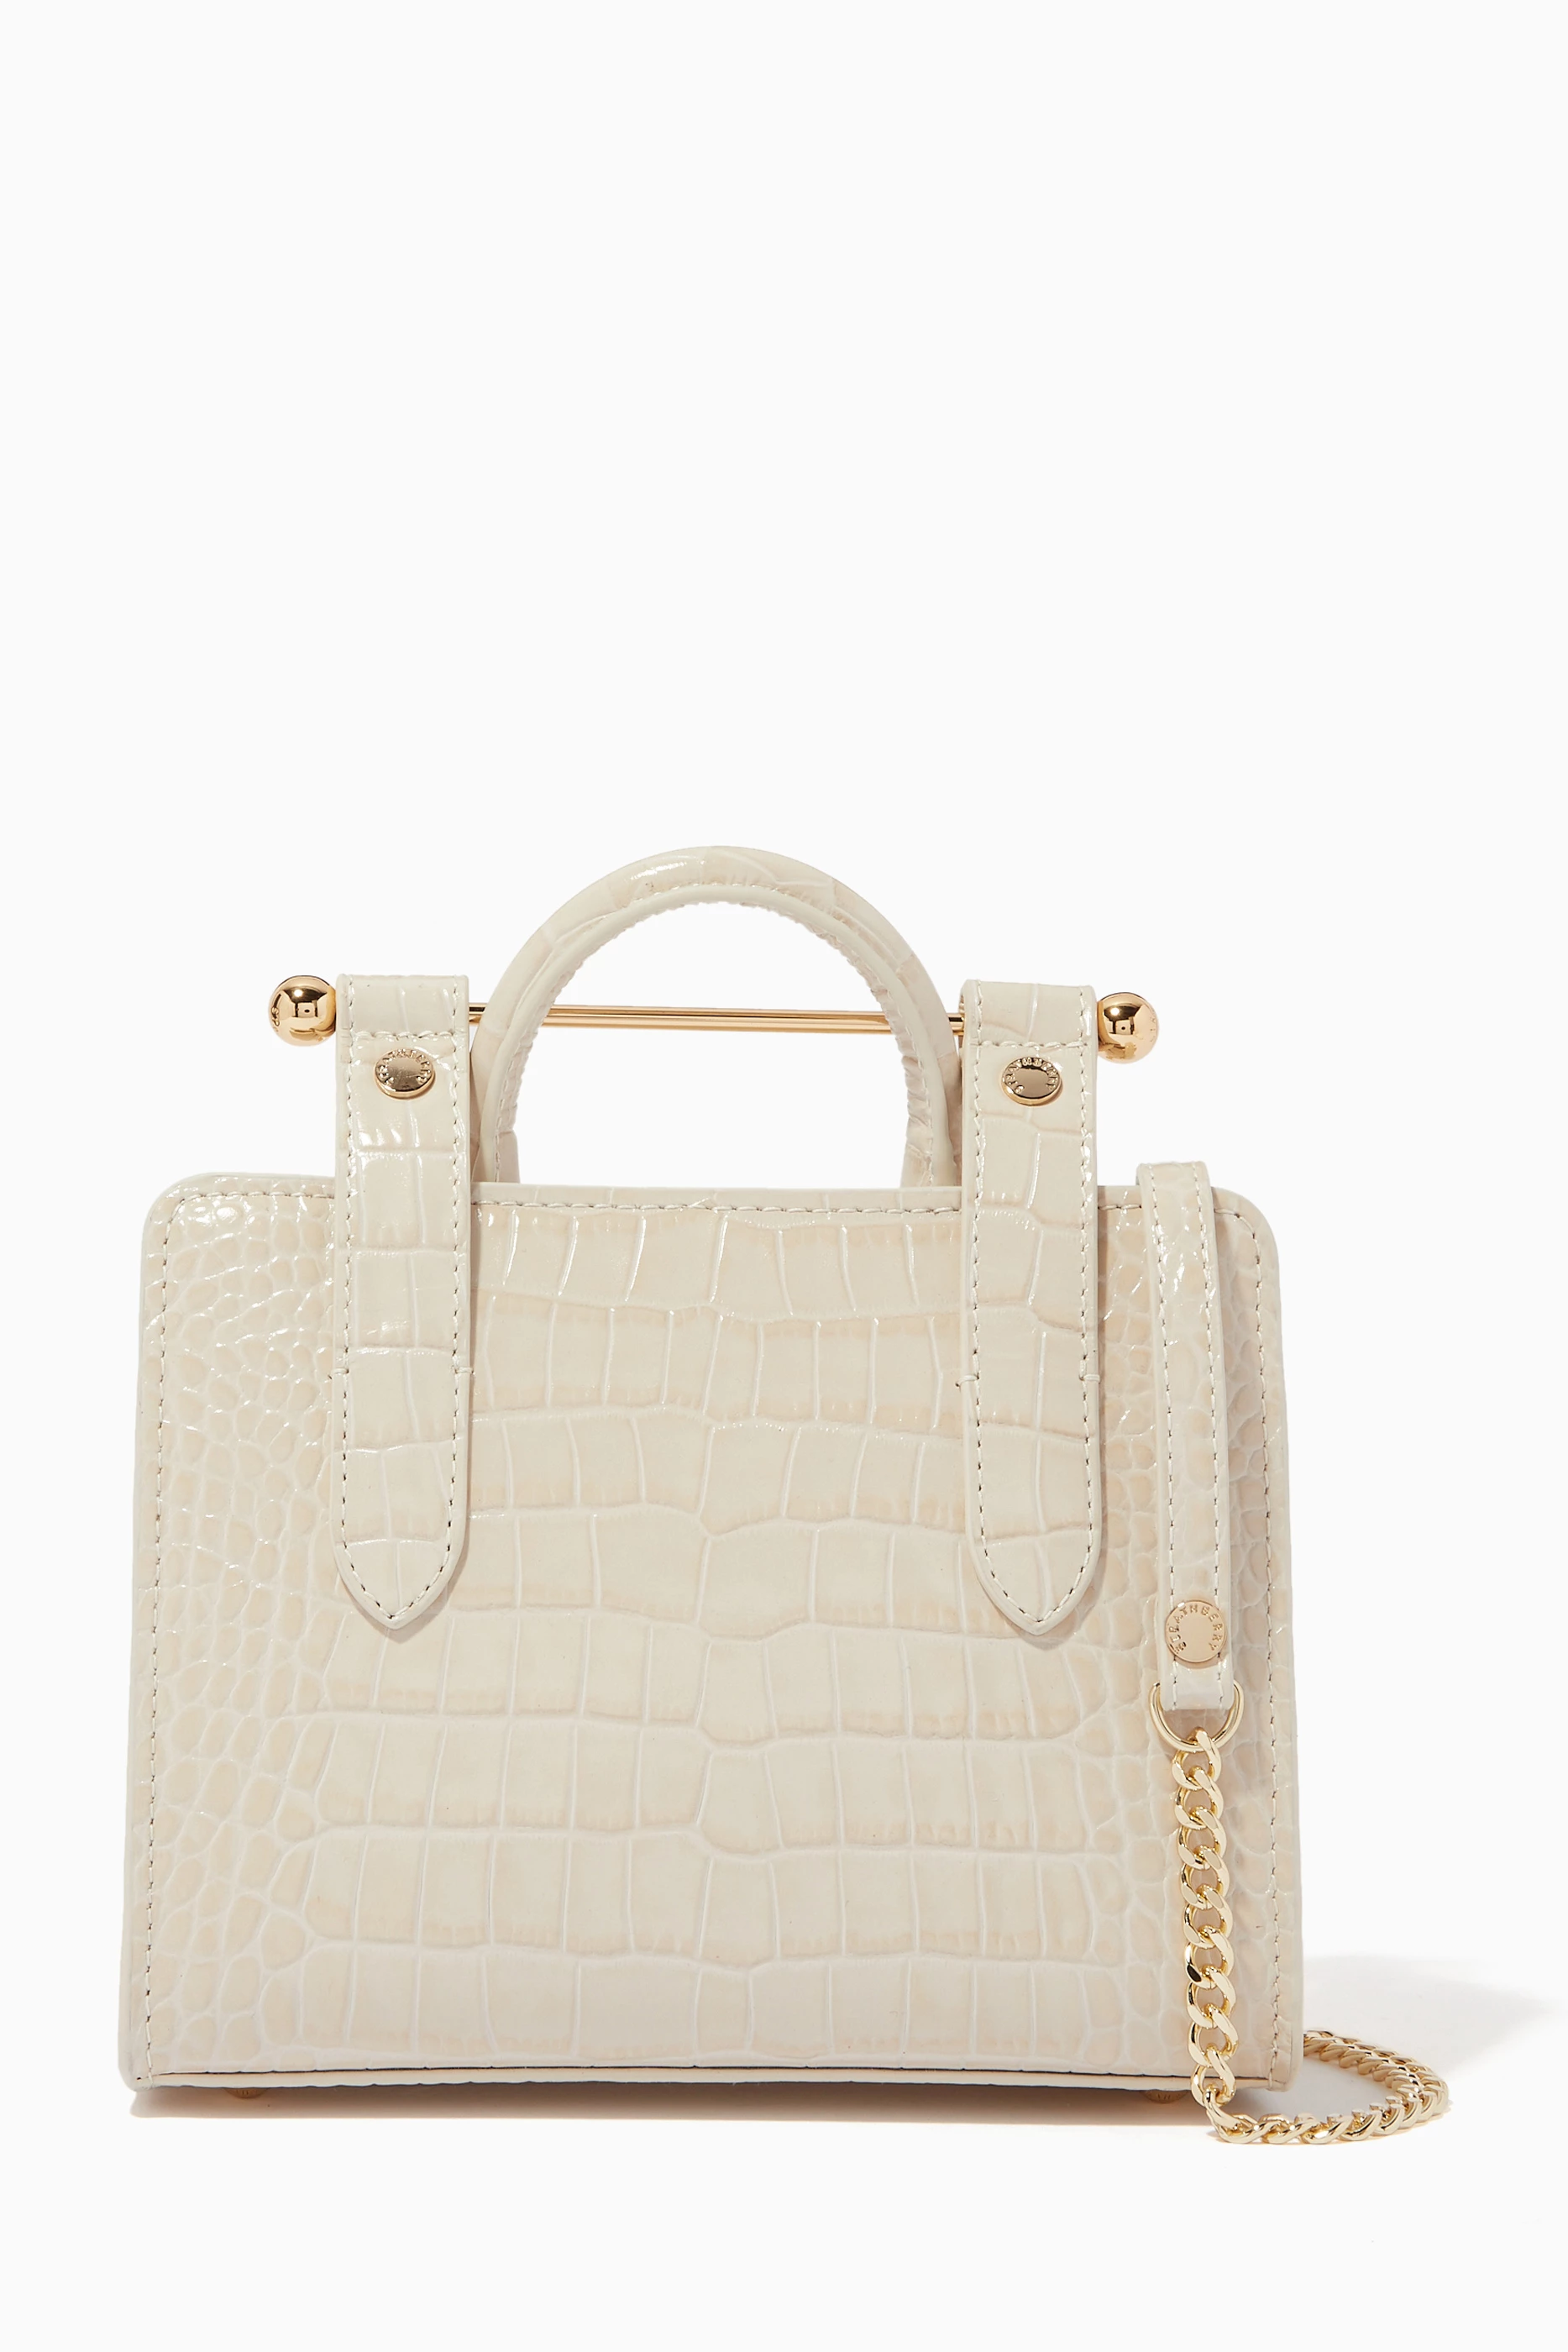 Strathberry Nano Croc Embossed Leather Tote